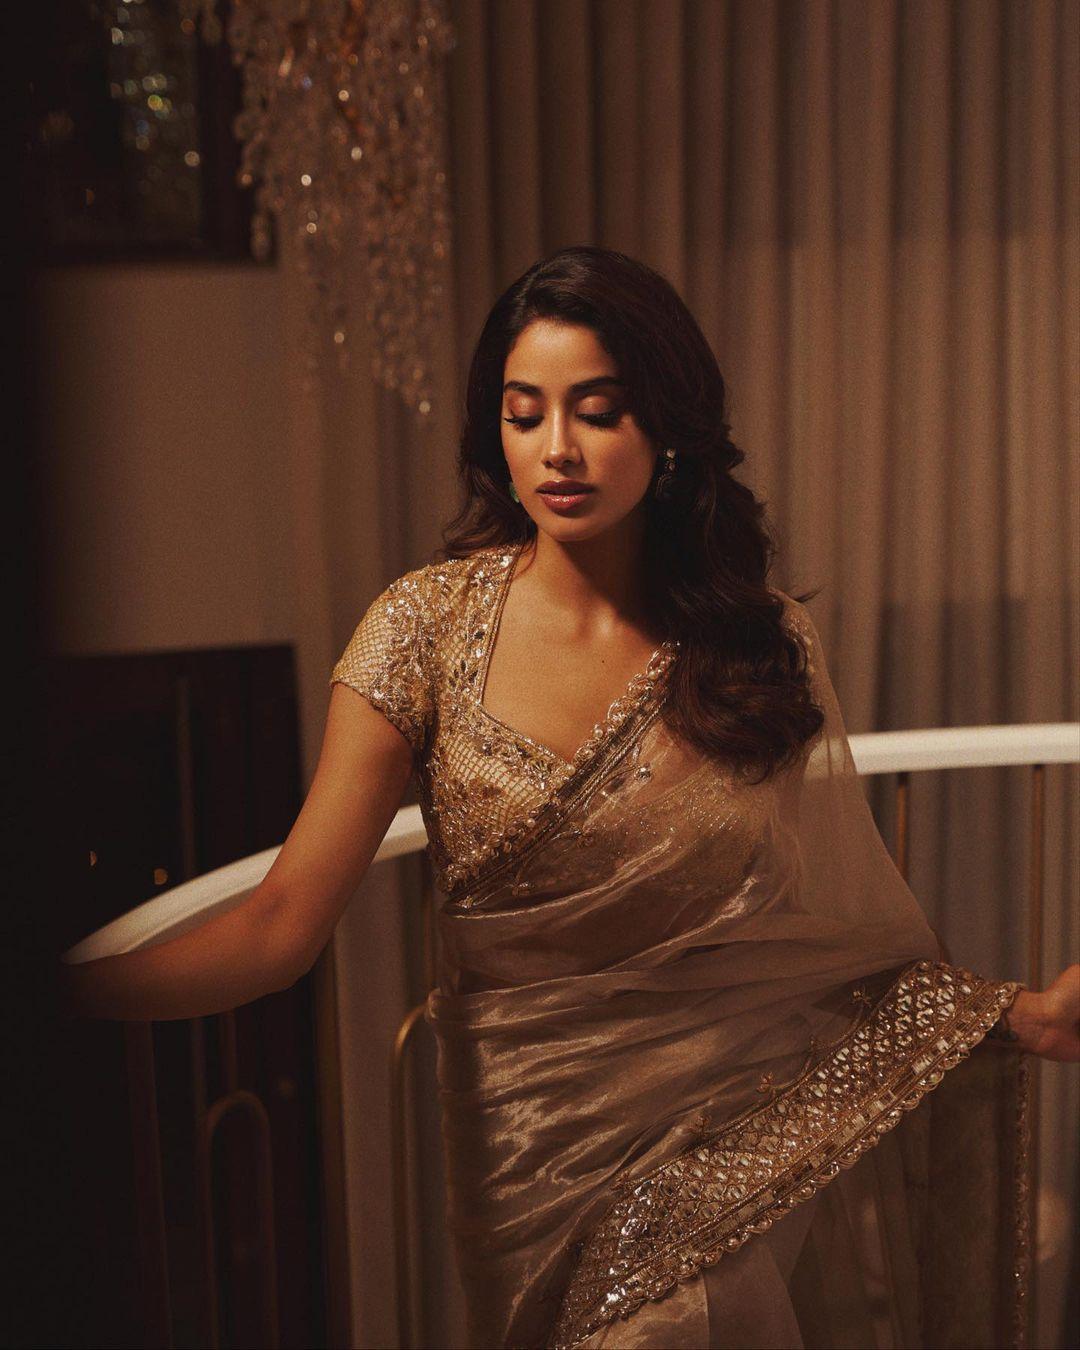 Janhvi Kapoor opted for a golden saree paired with a matching blouse, making a statement with her contrast earrings and bold lips.